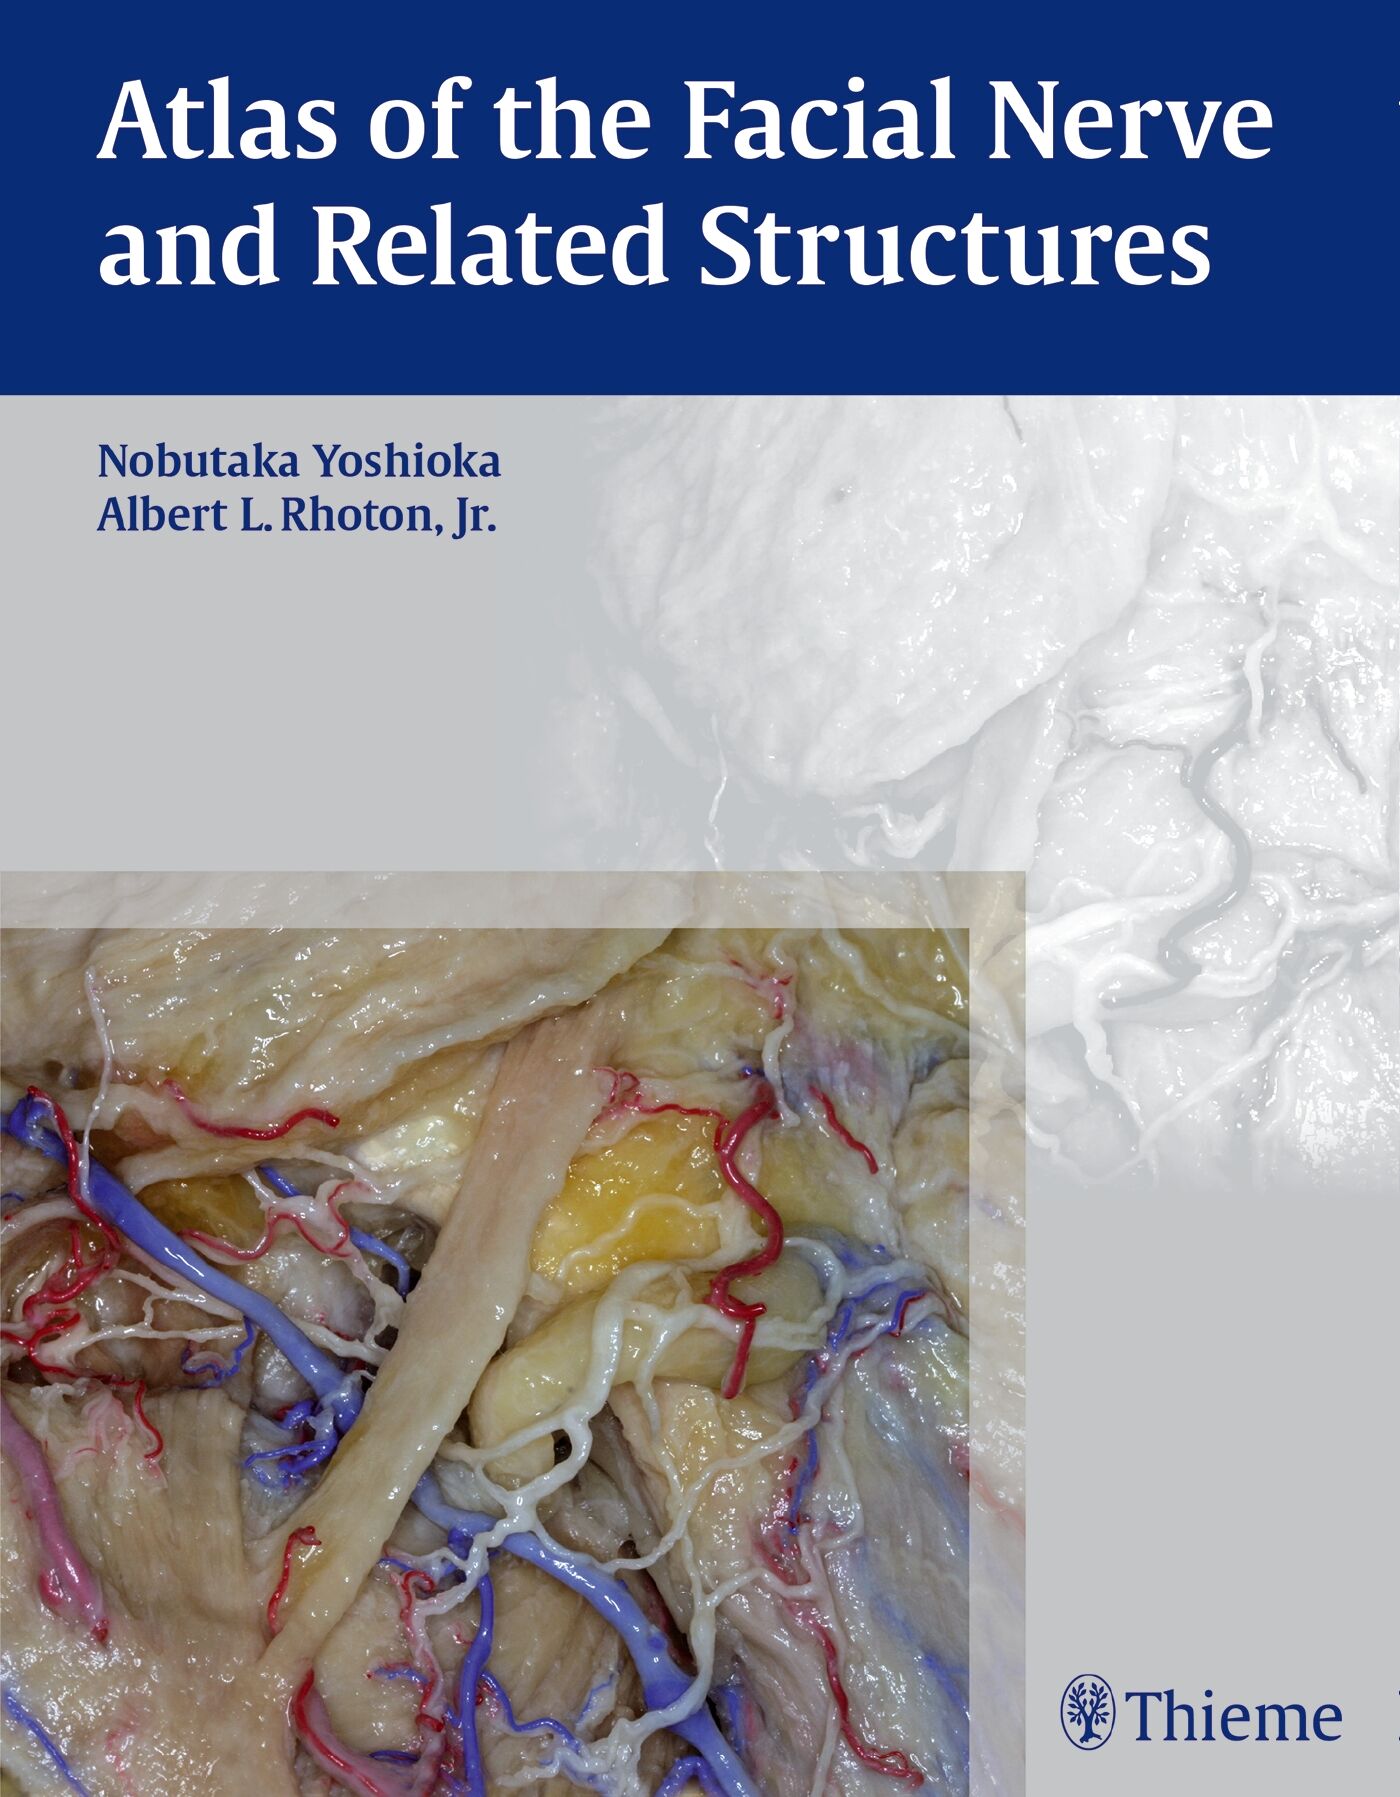 Atlas of the Facial Nerve and Related Structures, 9781626231719